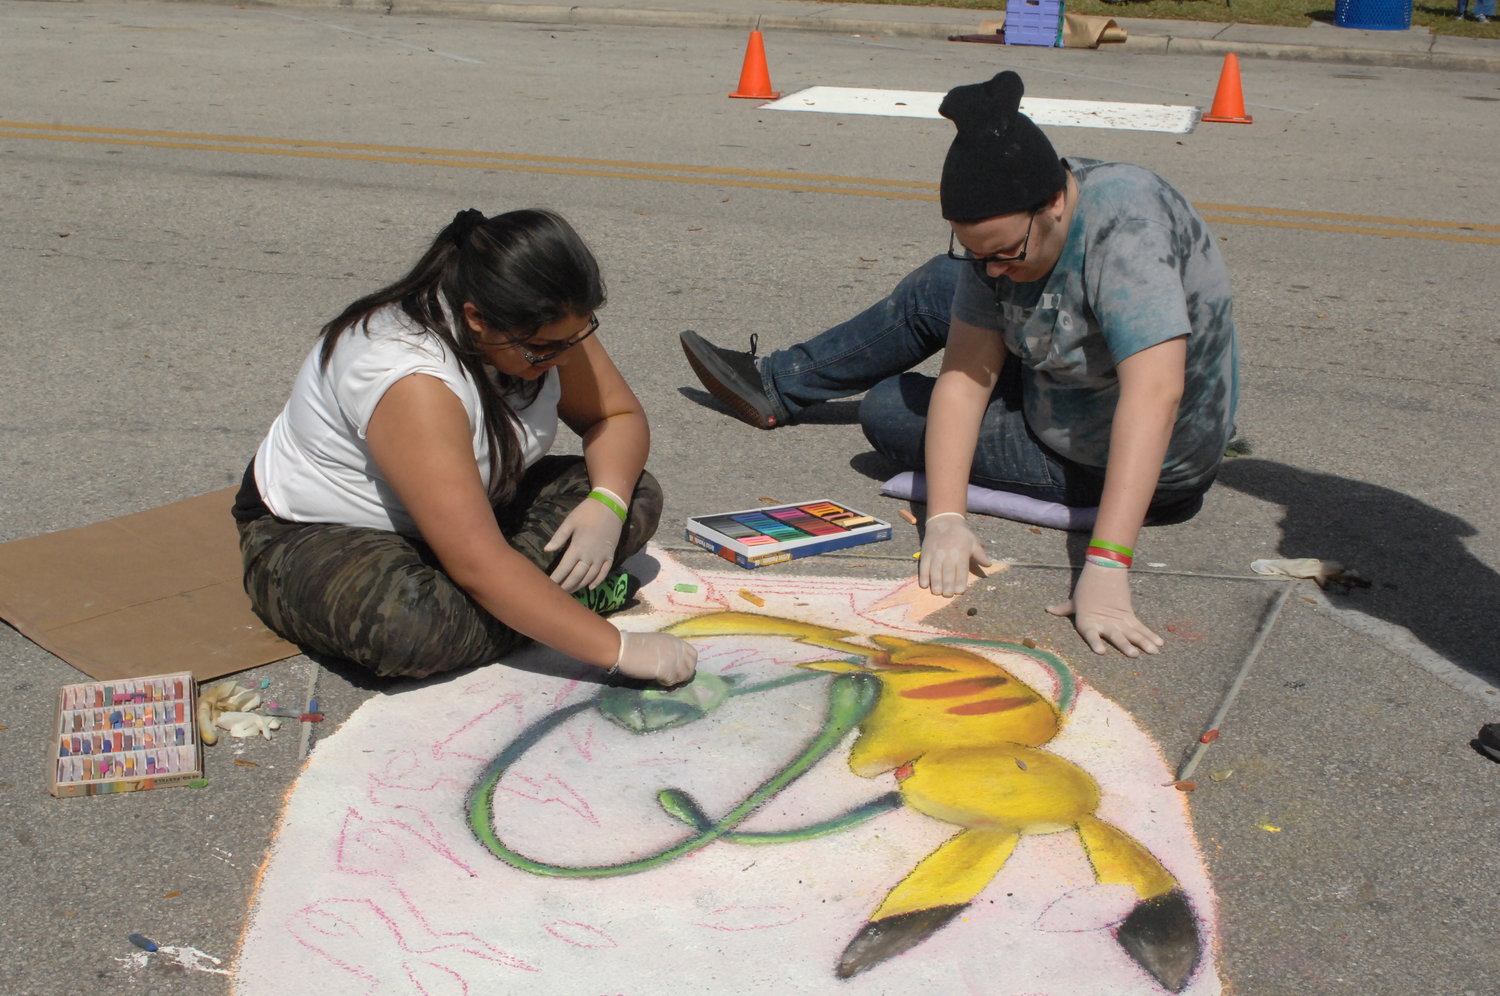 The Top of the Lake Art Festival includes chalk art.